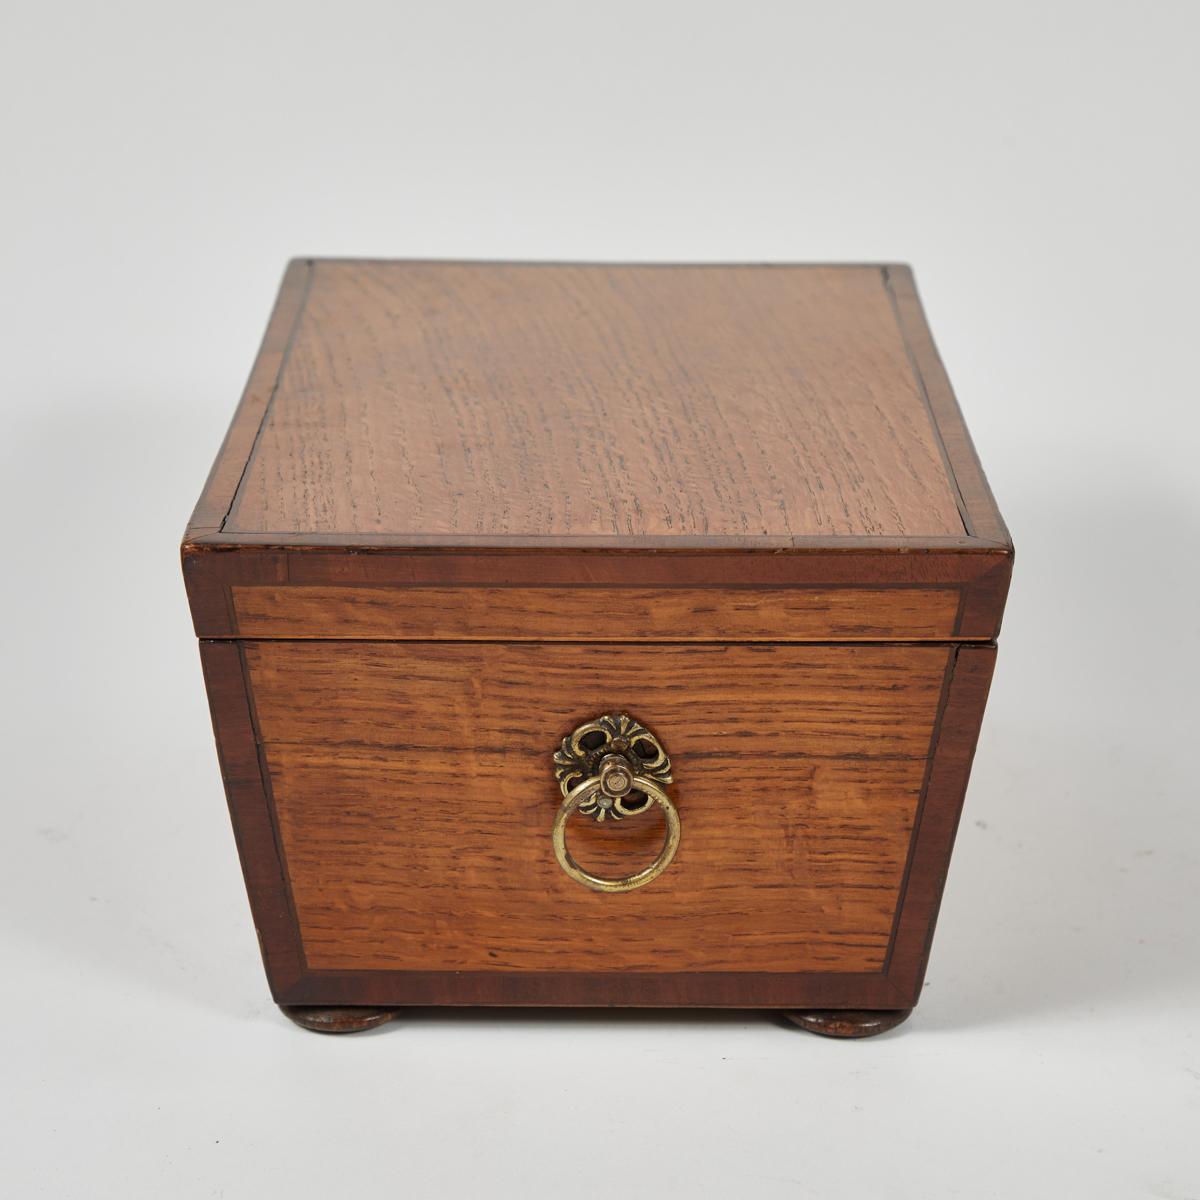 1830s English crossbanded oak box with patterned paper interior. Would work great for jewelry or for accessories on a desk. 